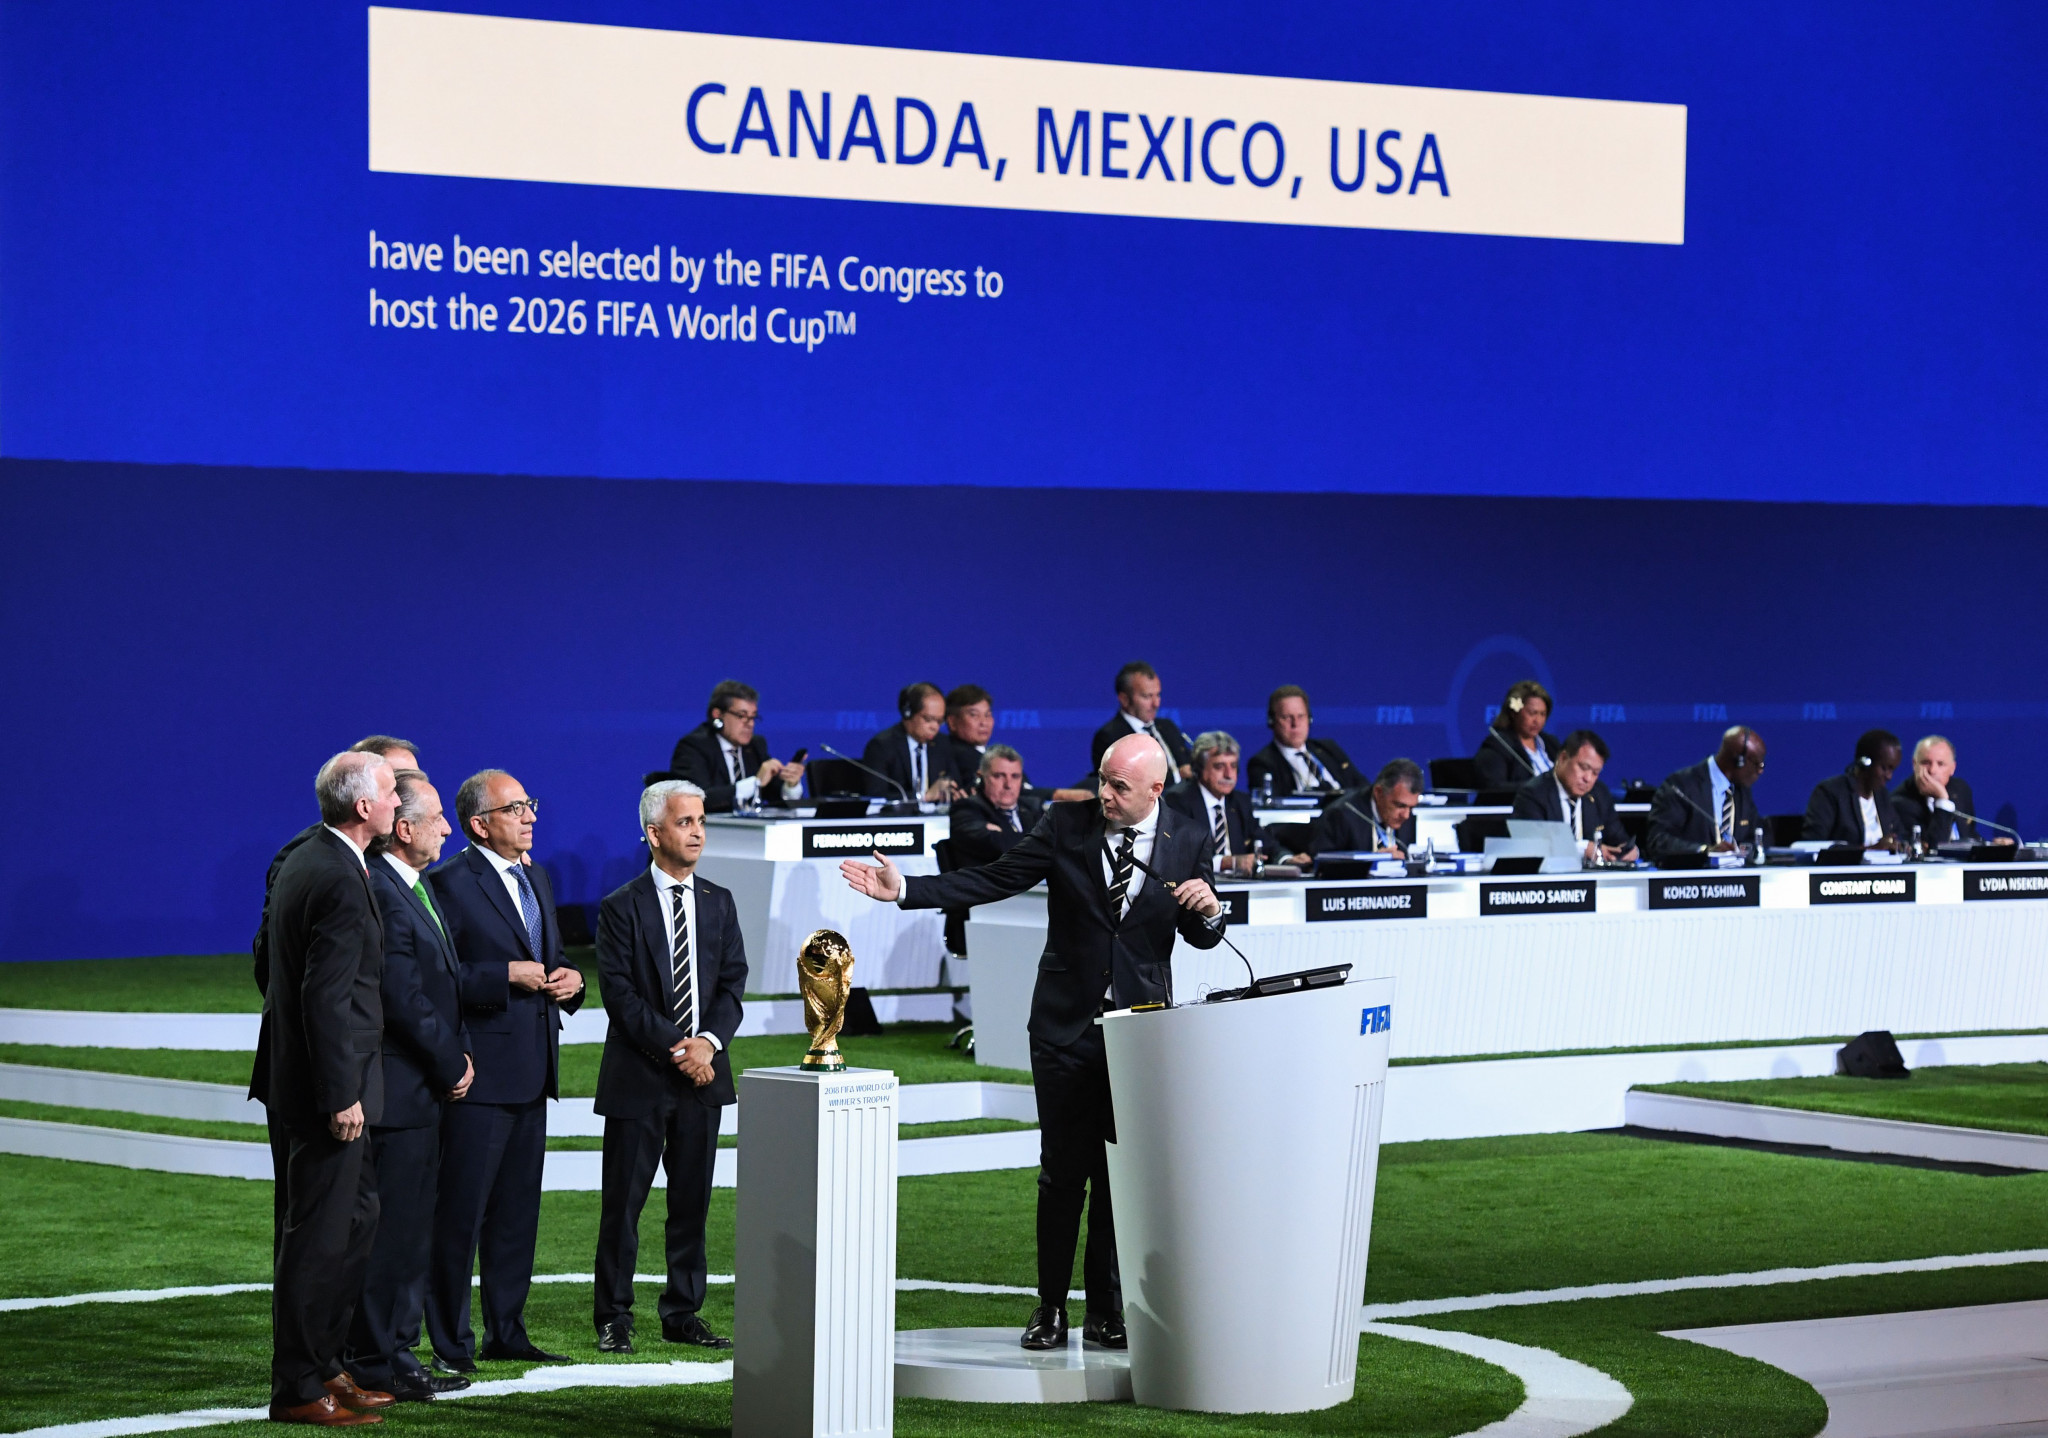 It has been claimed South Africa's support for the North American 2026 FIFA World Cup bid, despite Donald Trump's derogatory comments about Africa, may have been a factor in their defeat ©Getty Images